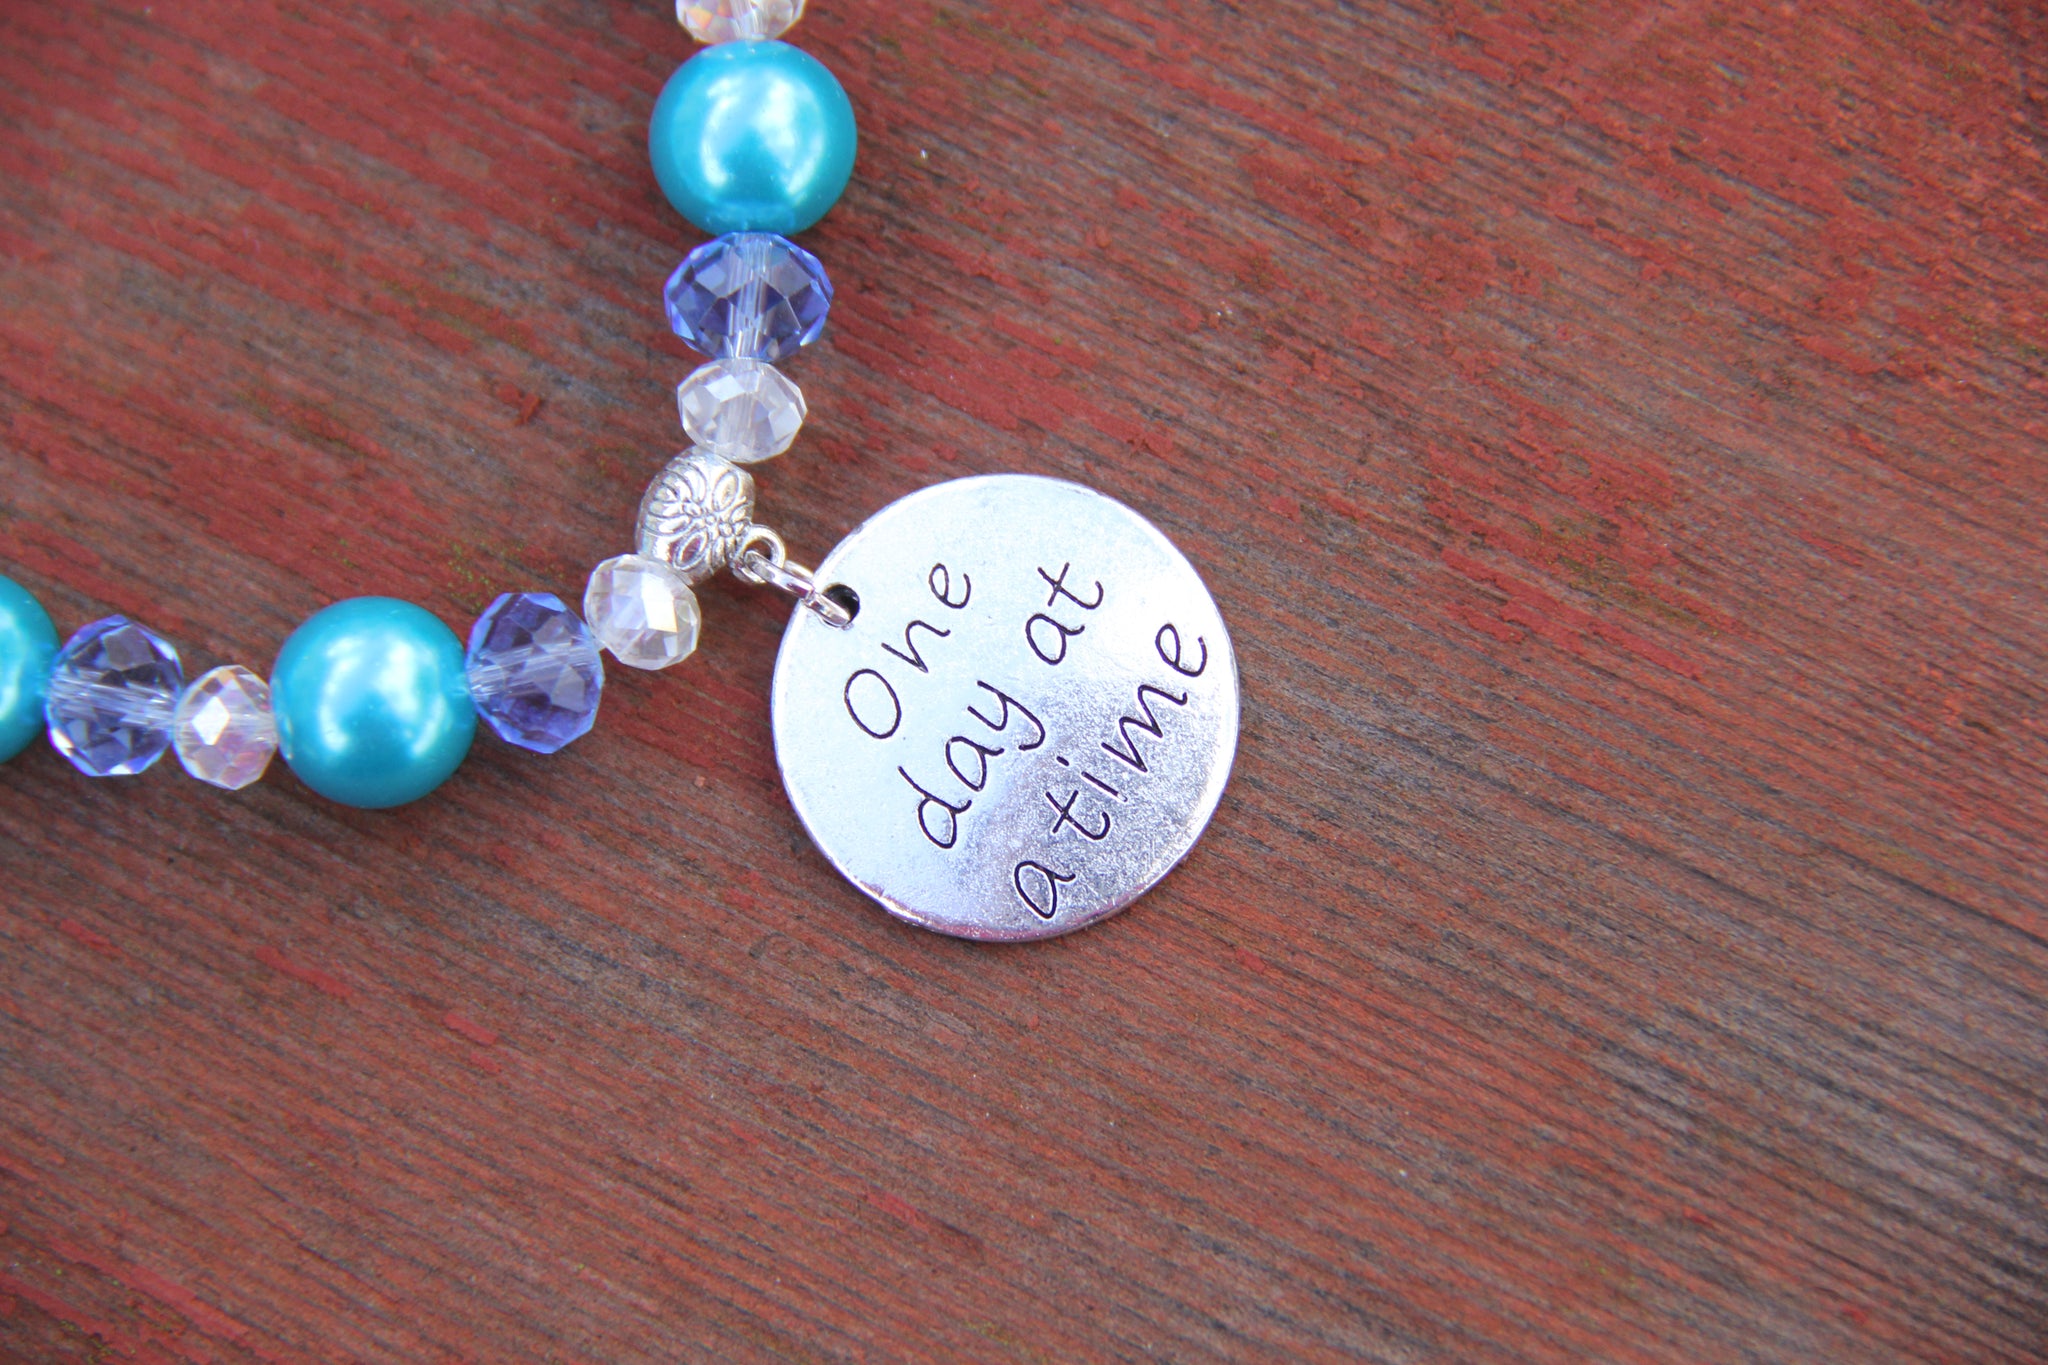 Turquoise glass beads with "one day at a time" charm